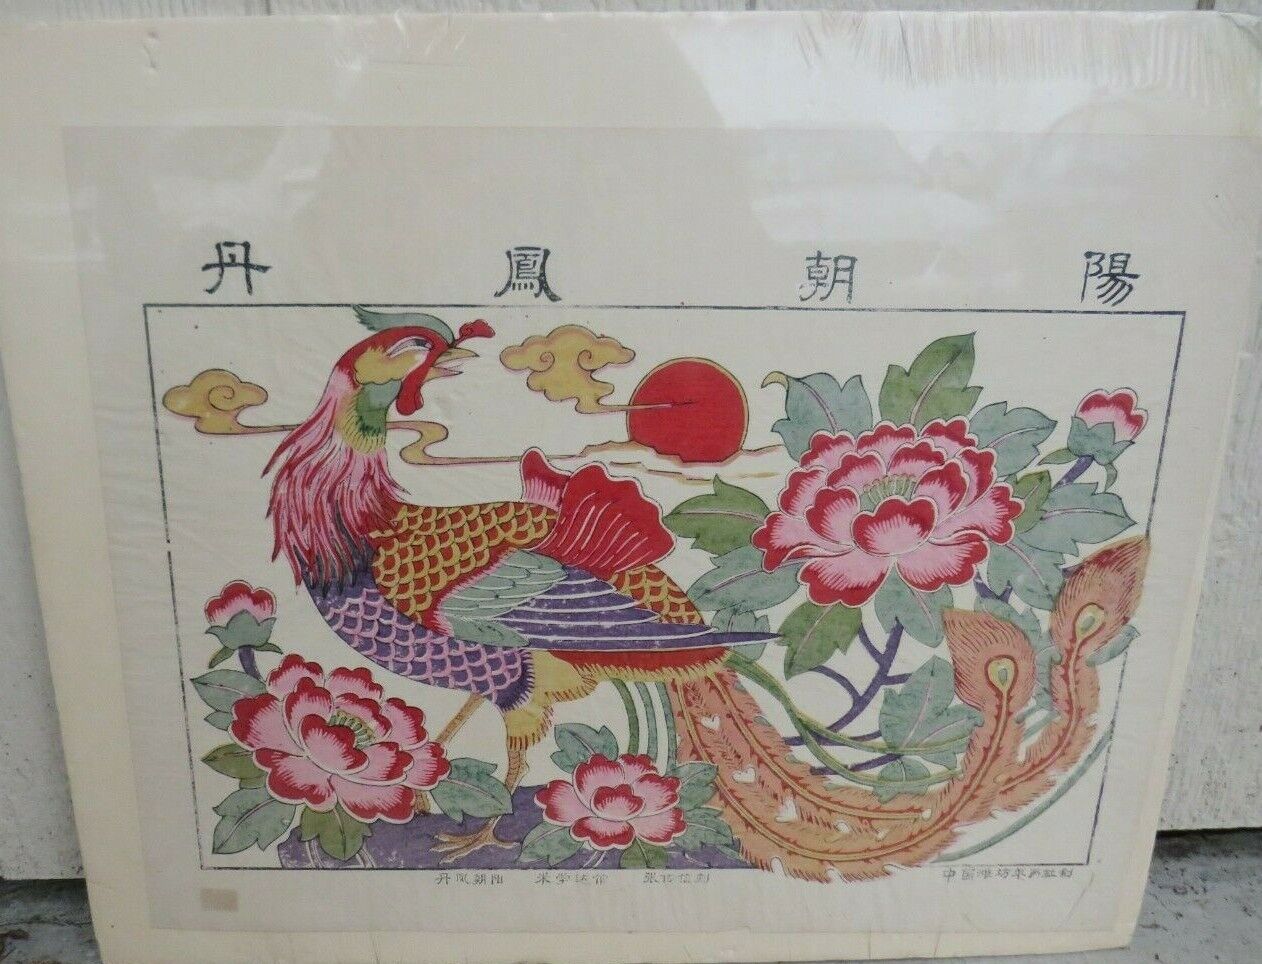 LARGE 19 C. CHINESE PHEASANT WOODBLOCK PRINT HAND COLORED